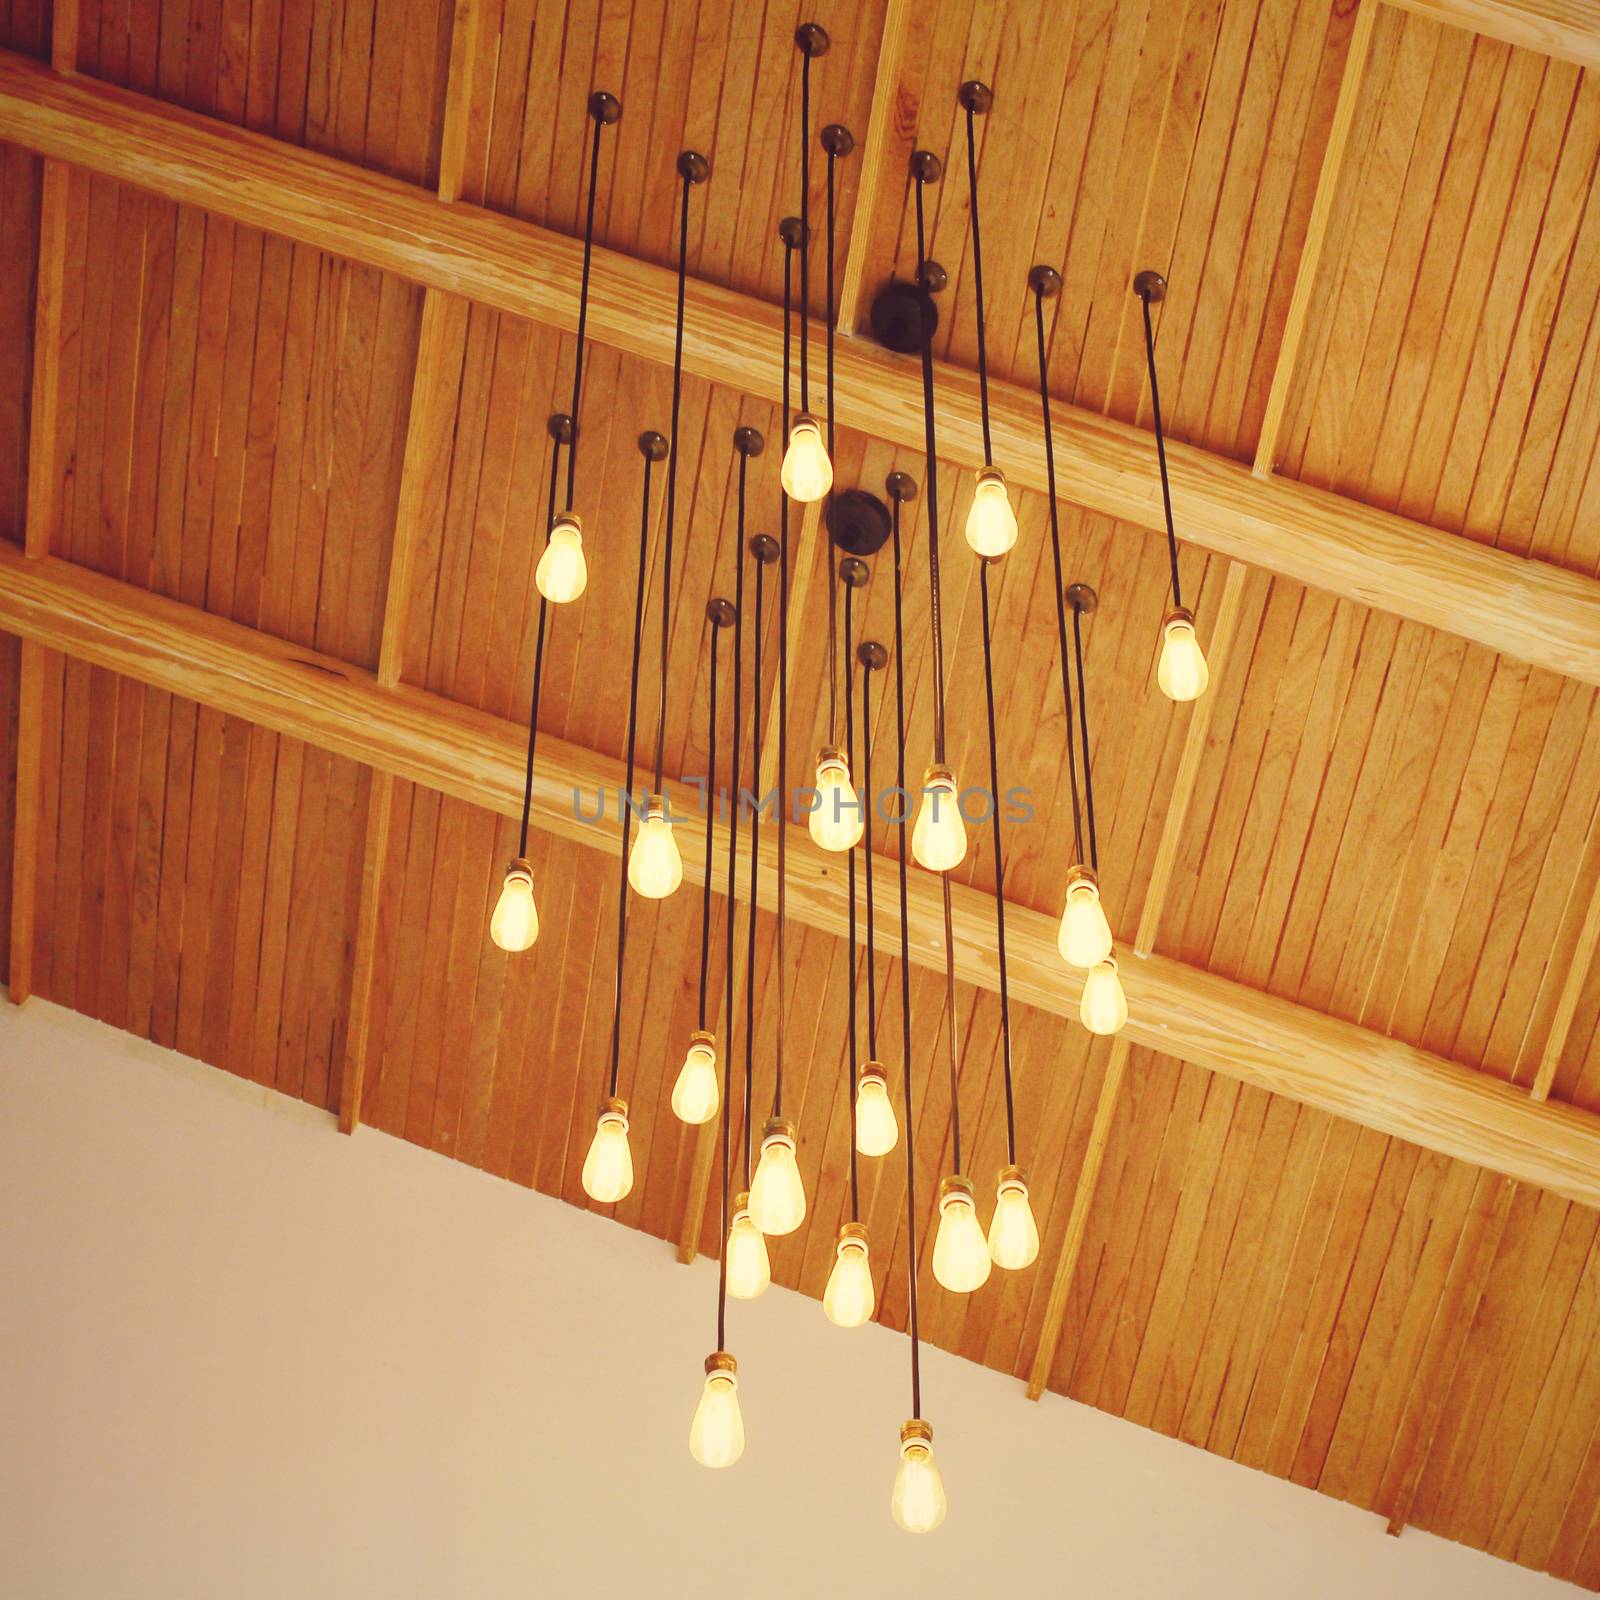 Vintage lighting decor hanging from ceiling with retro filter ef by nuchylee